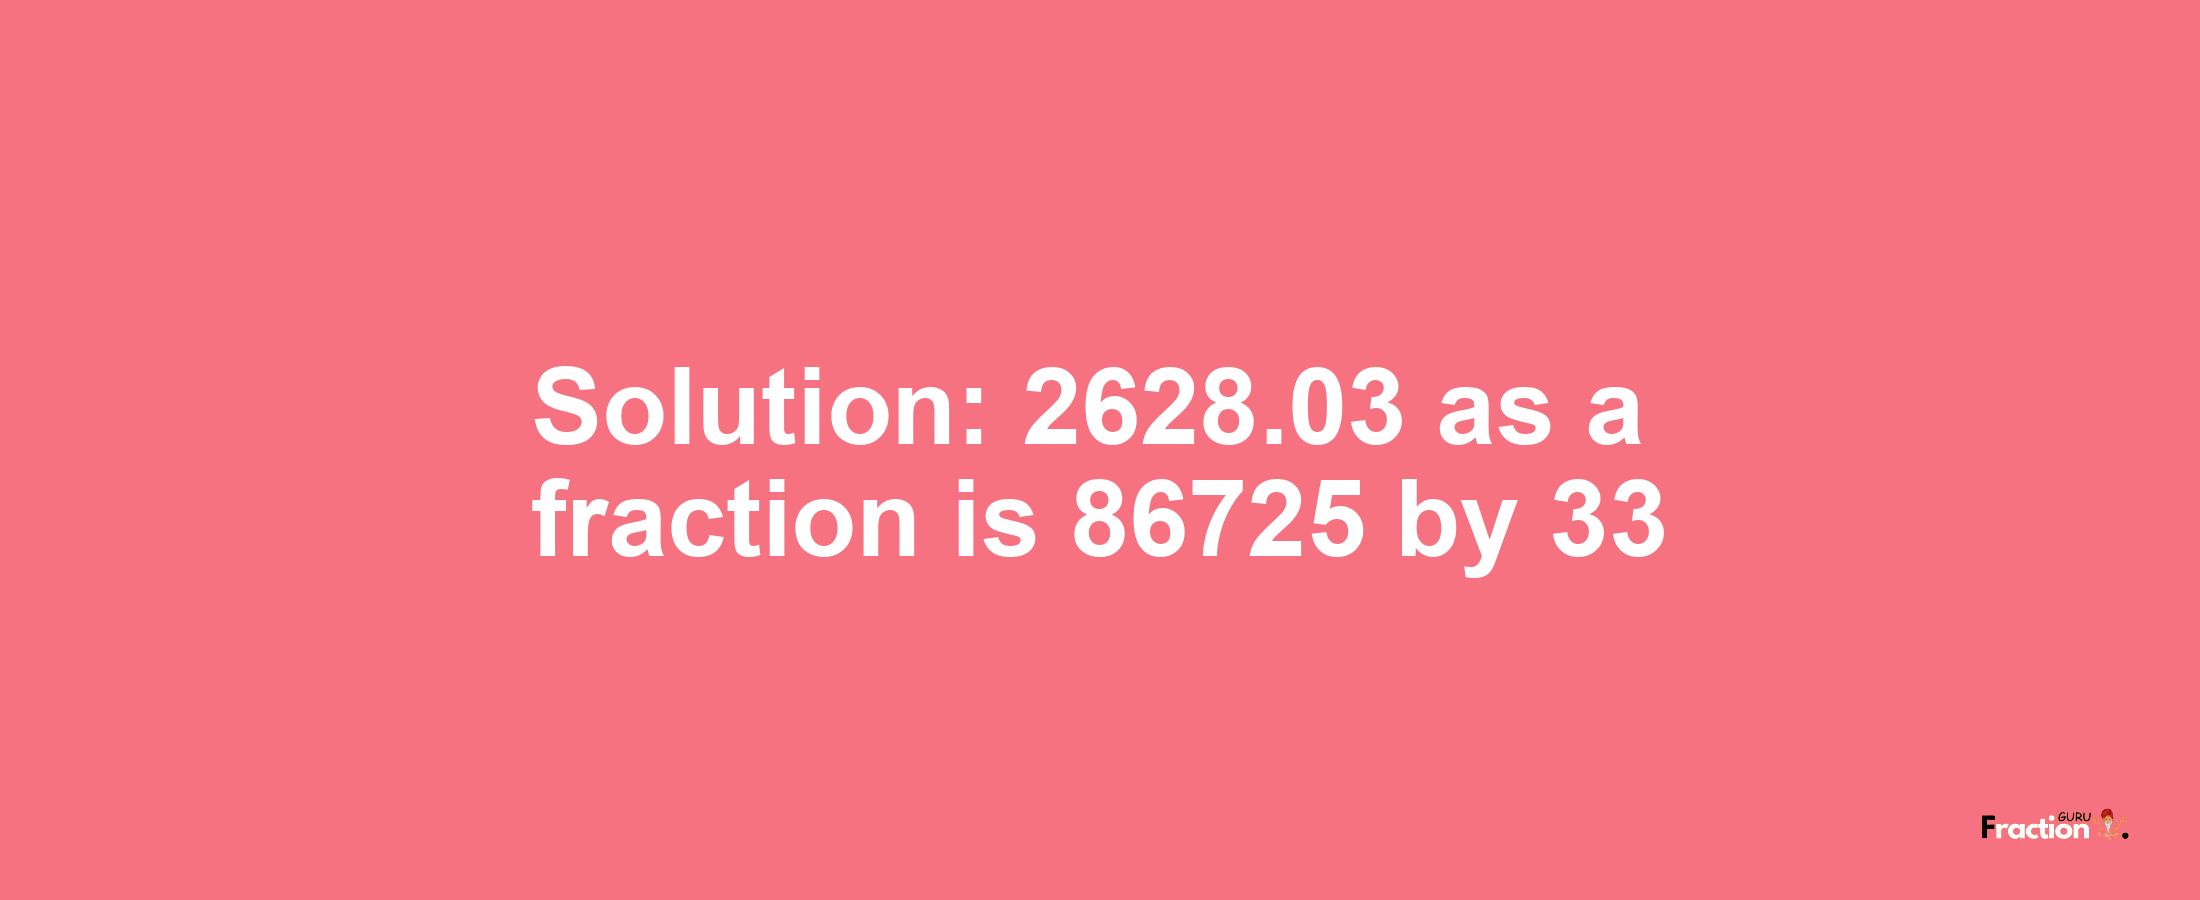 Solution:2628.03 as a fraction is 86725/33